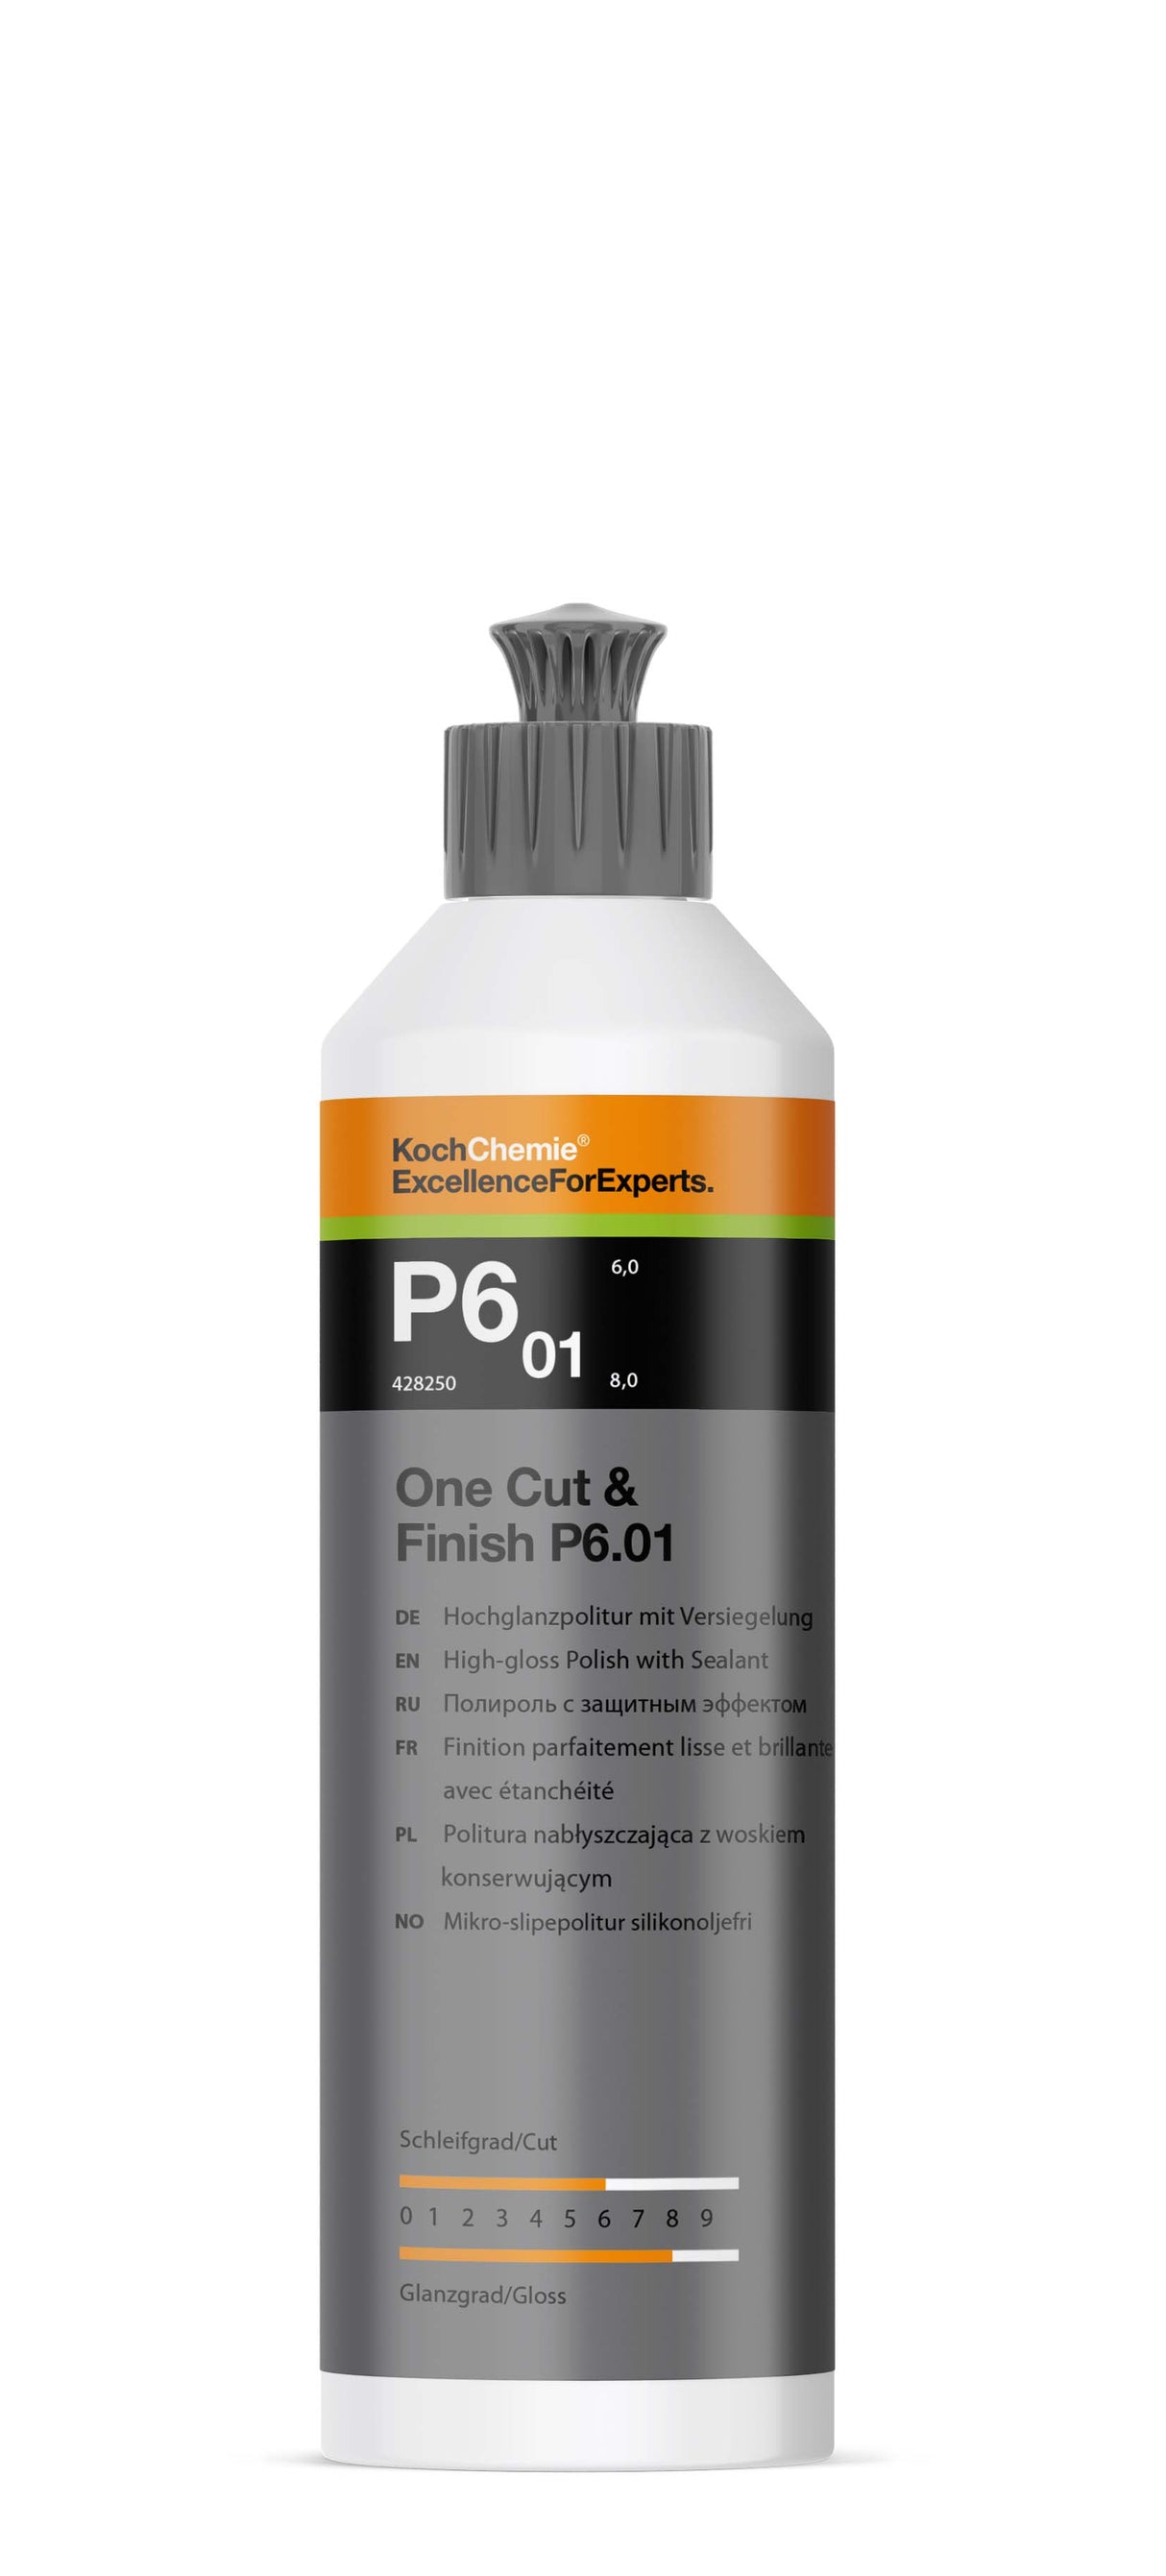 Koch Chemie One Cut and Finish P6.01